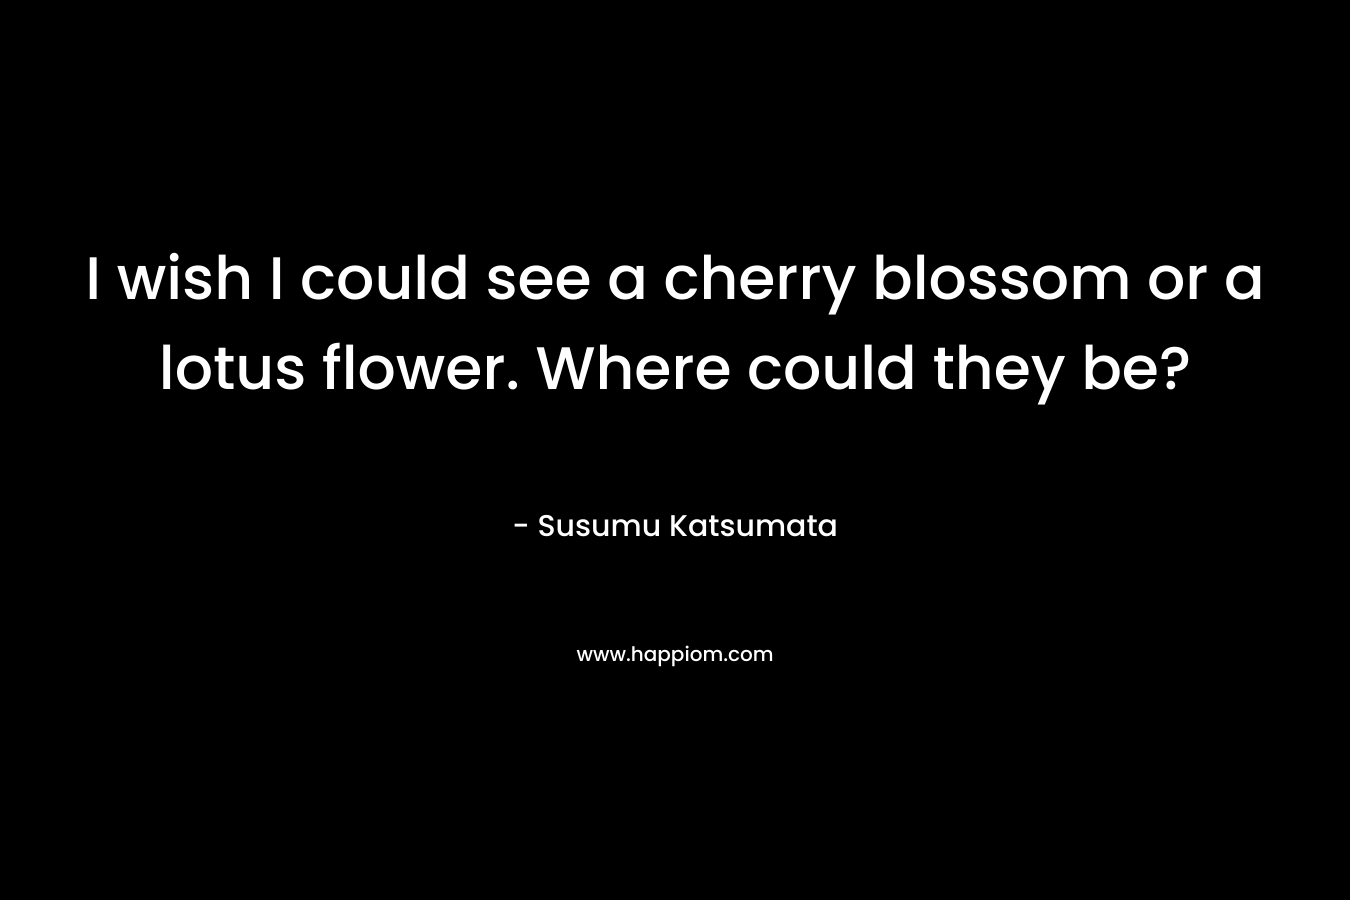 I wish I could see a cherry blossom or a lotus flower. Where could they be? – Susumu Katsumata